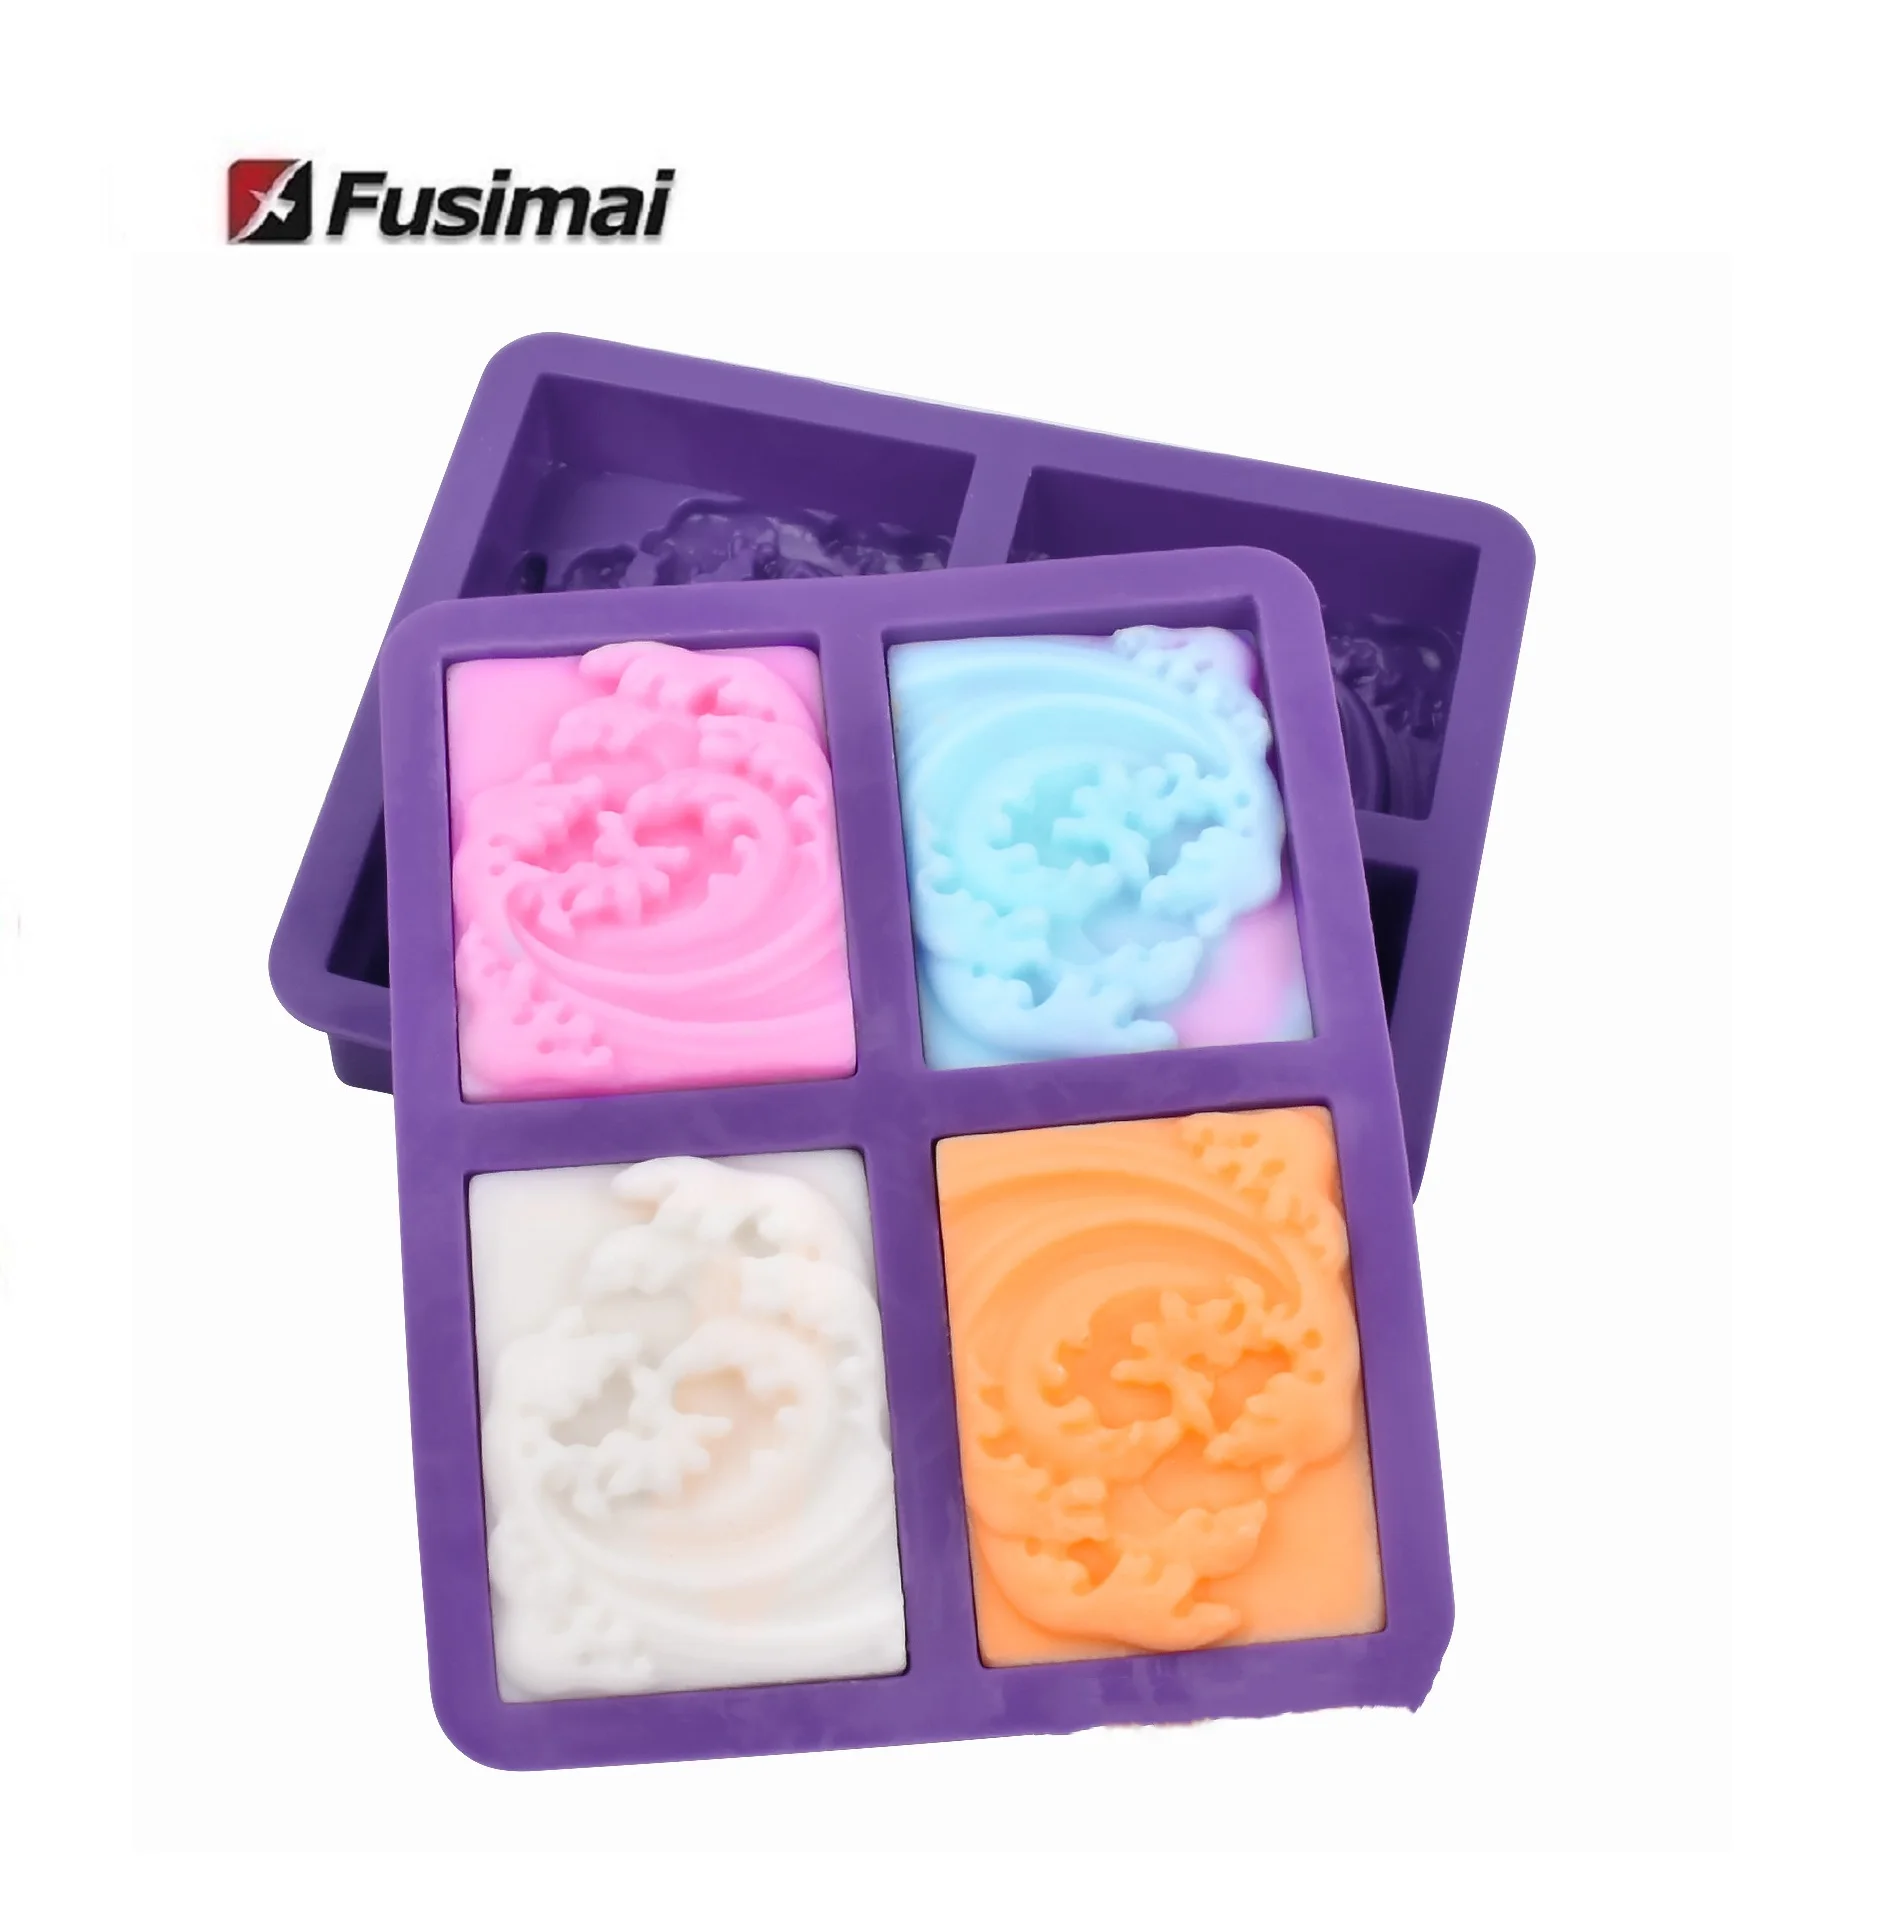 

Fusimai 4-cavity Wave Pattern In Silicon Wholesale Mould 4 Hole Rectangular Wave-shaped Silicone Soap Mold, Random